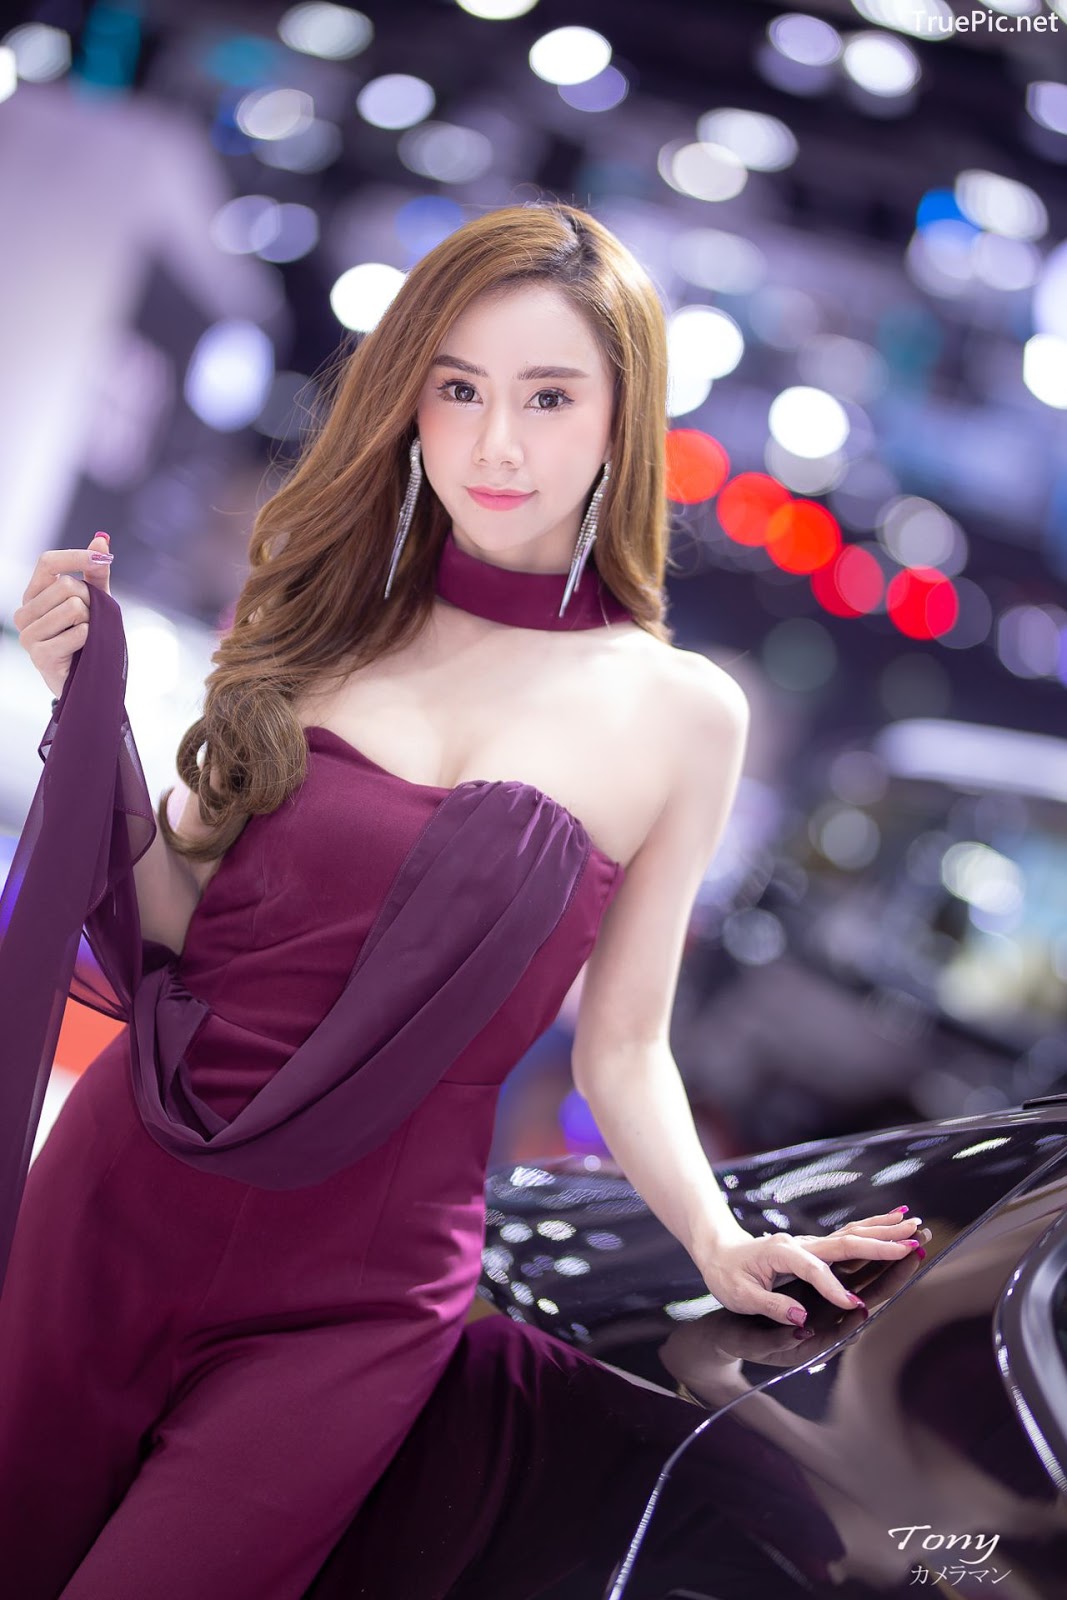 Image-Thailand-Hot-Model-Thai-Racing-Girl-At-Motor-Show-2019-TruePic.net- Picture-14